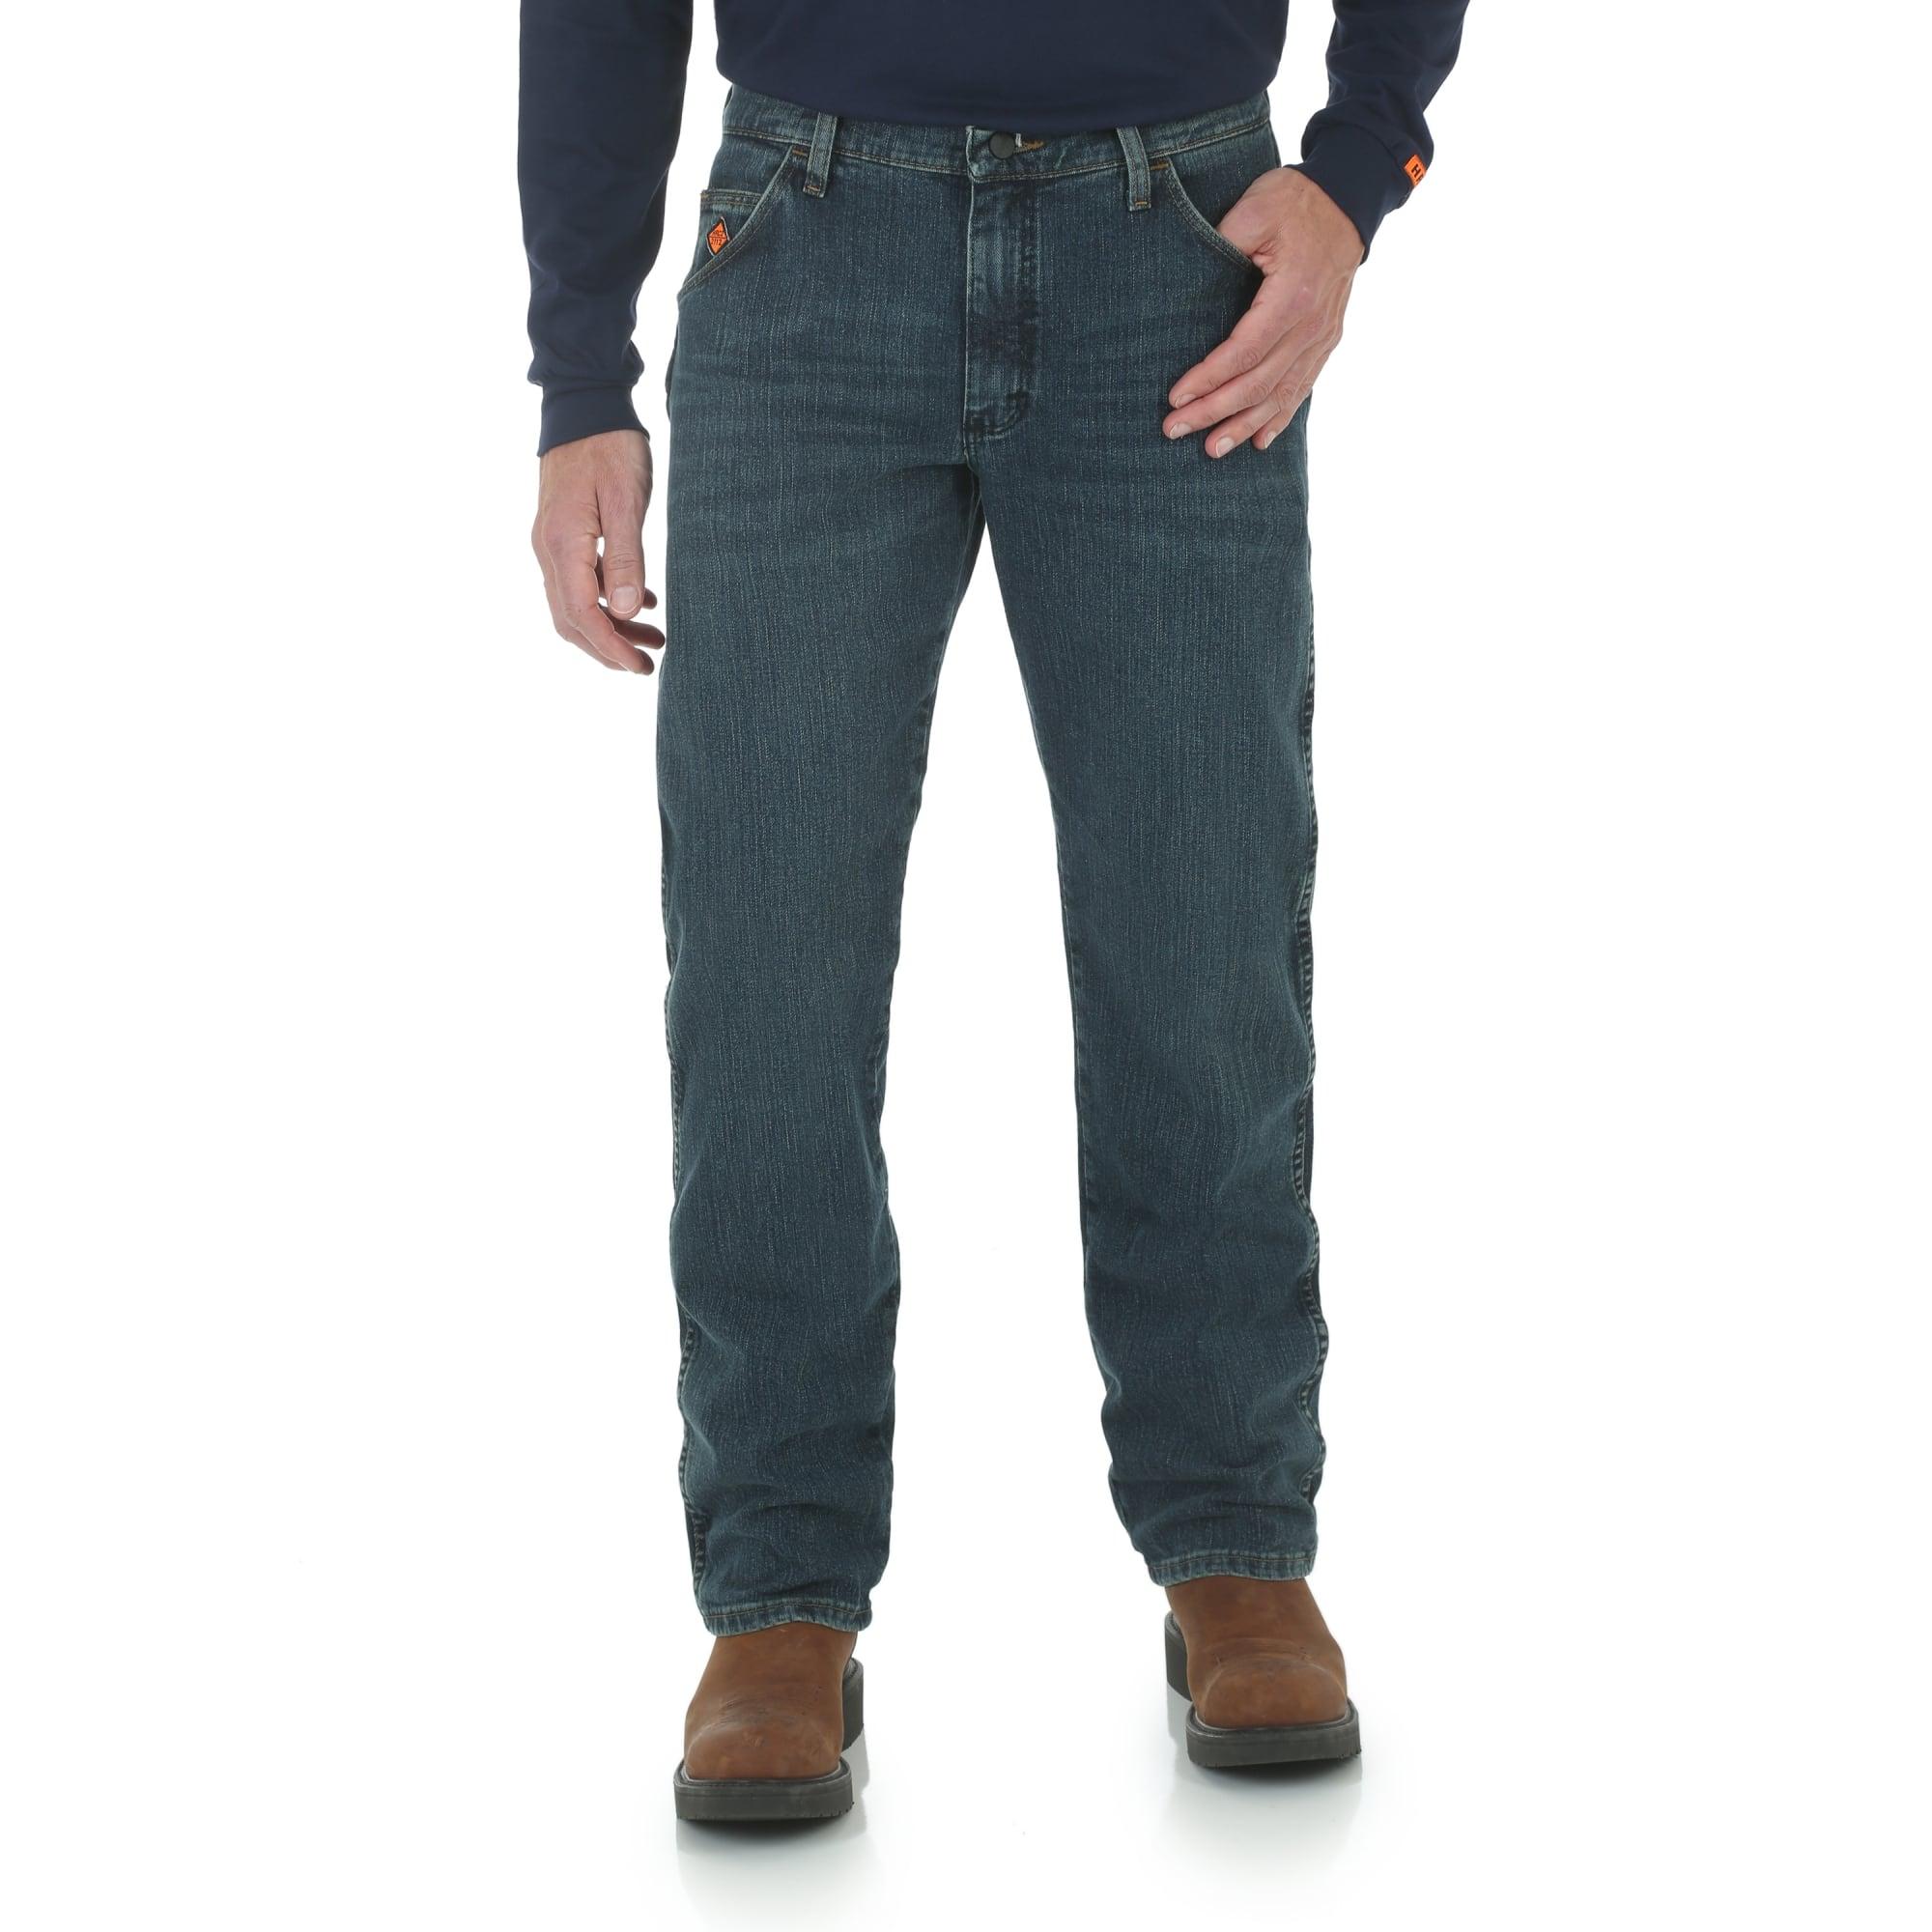 Flame Resistant (FR) Comfort Fit Jean - Purpose-Built / Home of the Trades